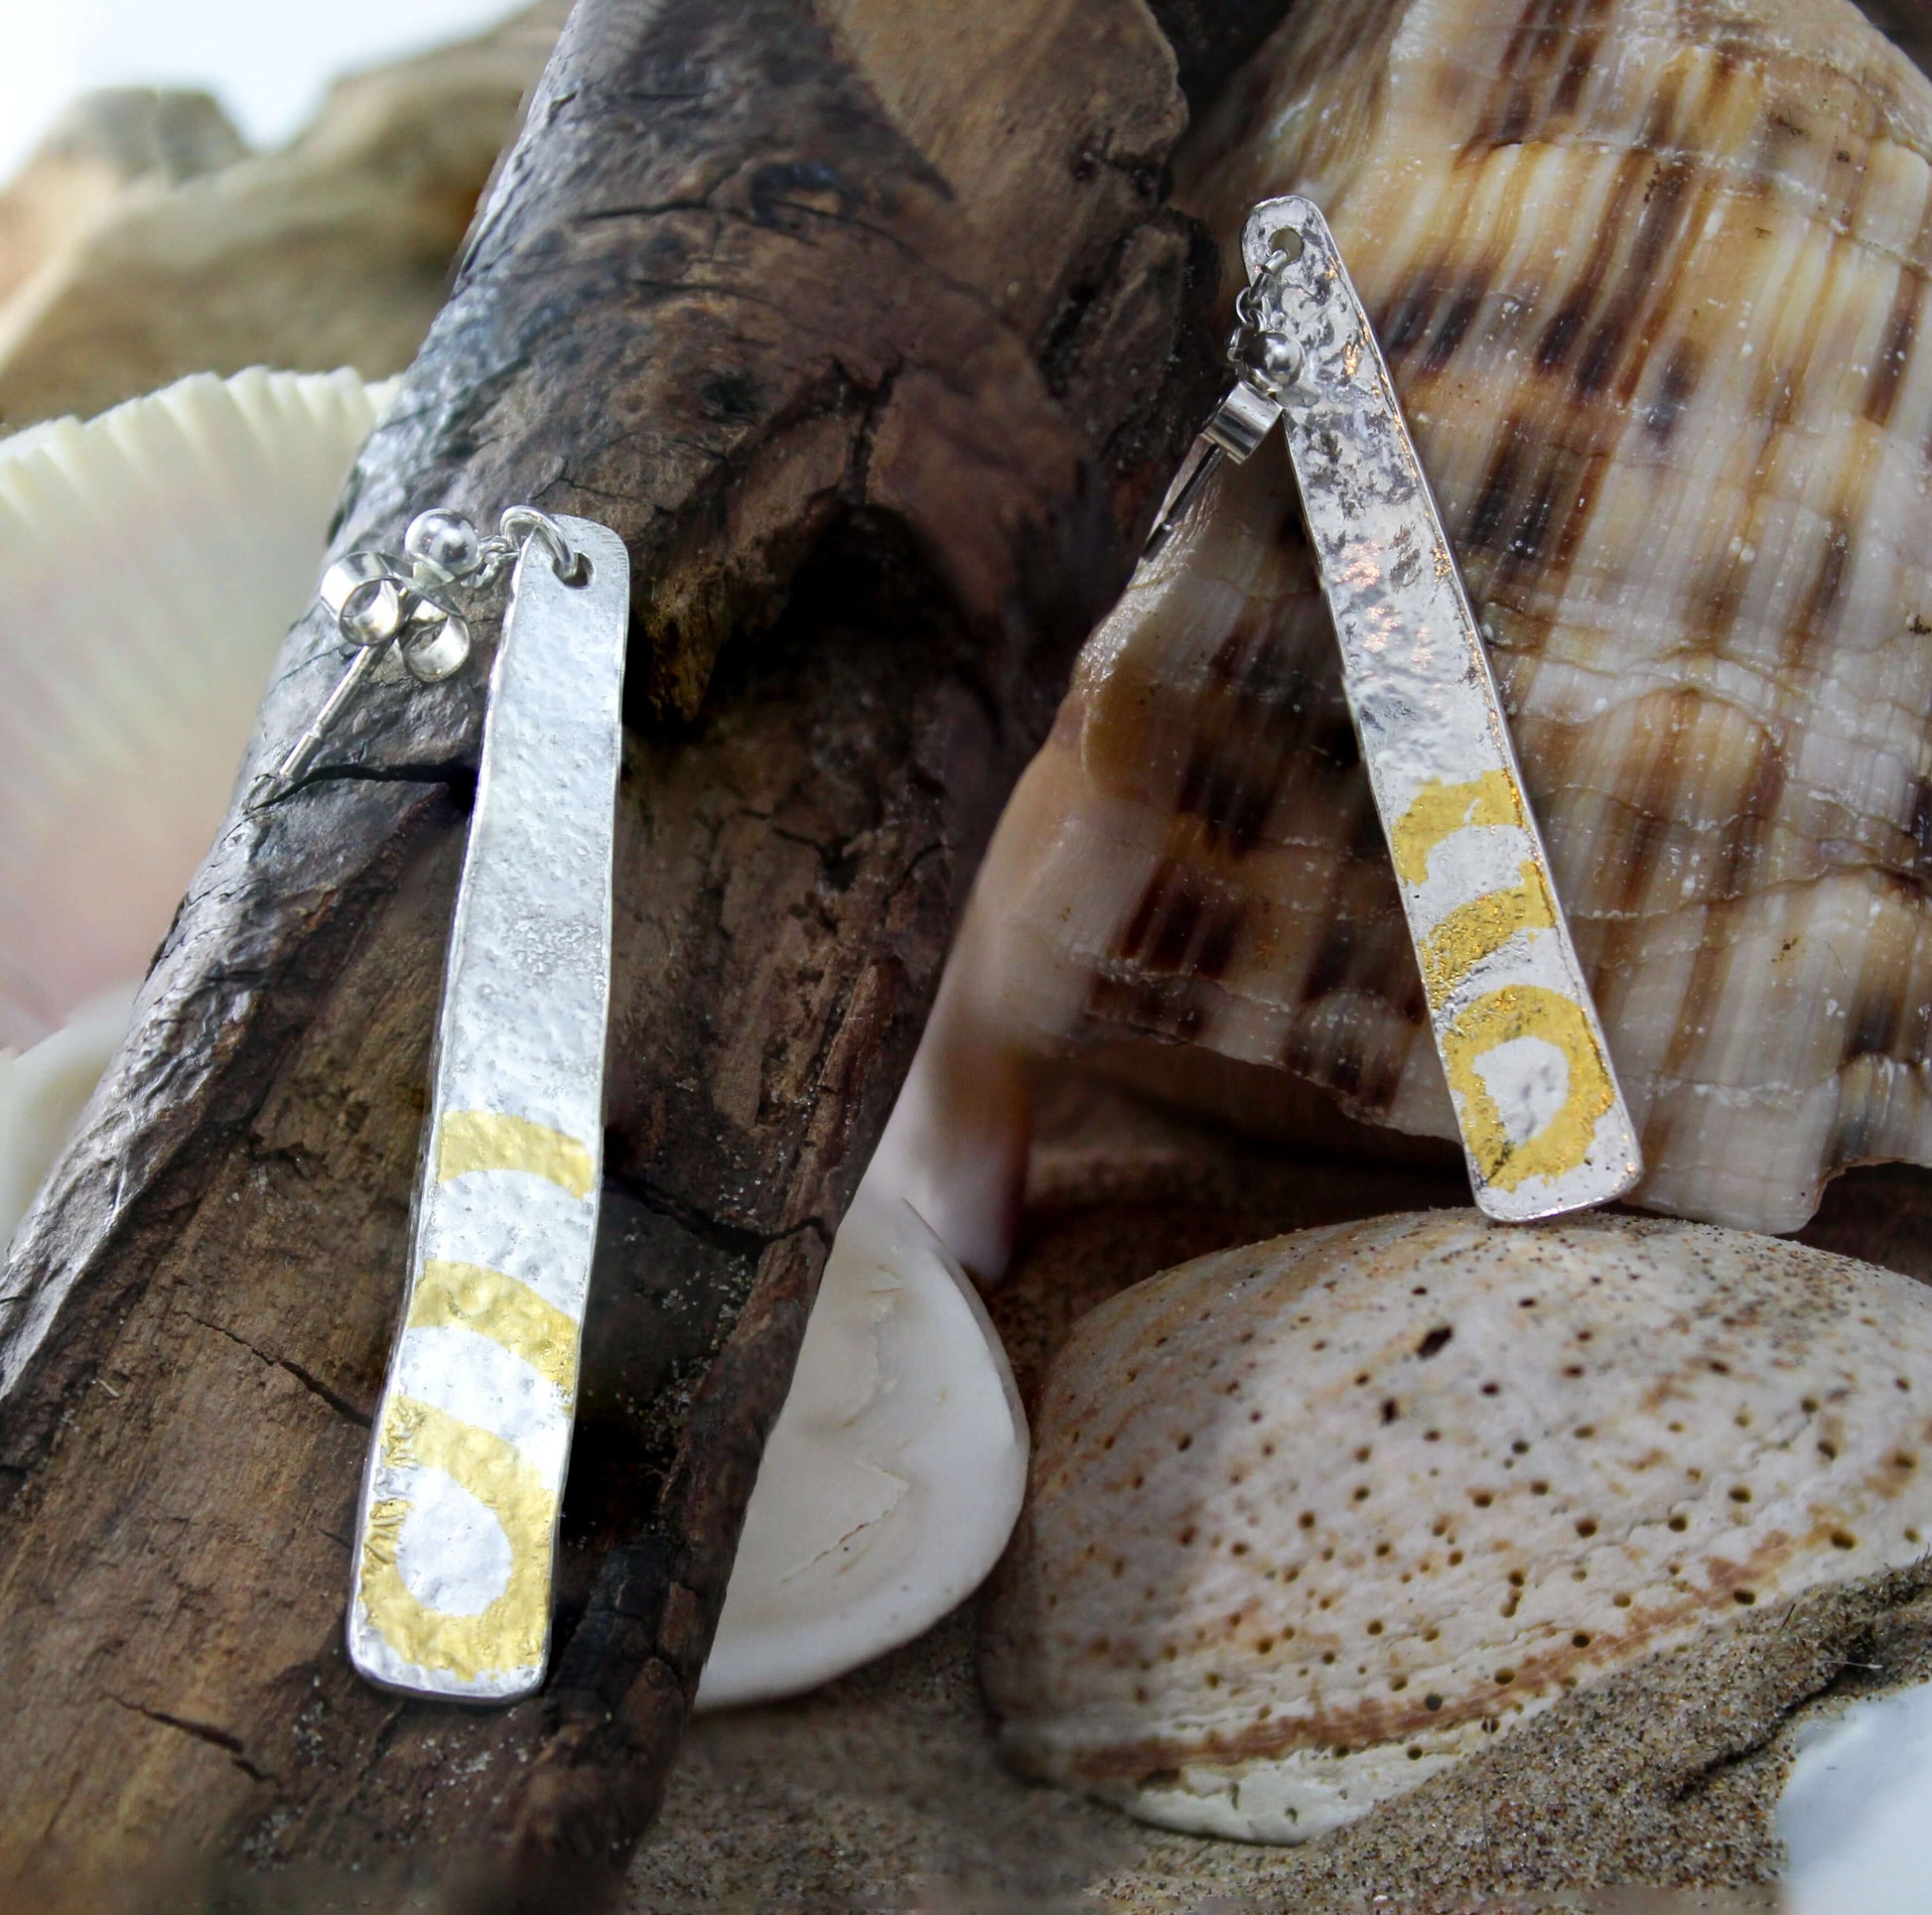 An Ghrian Drop Earrings - Reticulated Silver with Keum Boo 24k Gold displayed on drift wood by Atlantic Rose